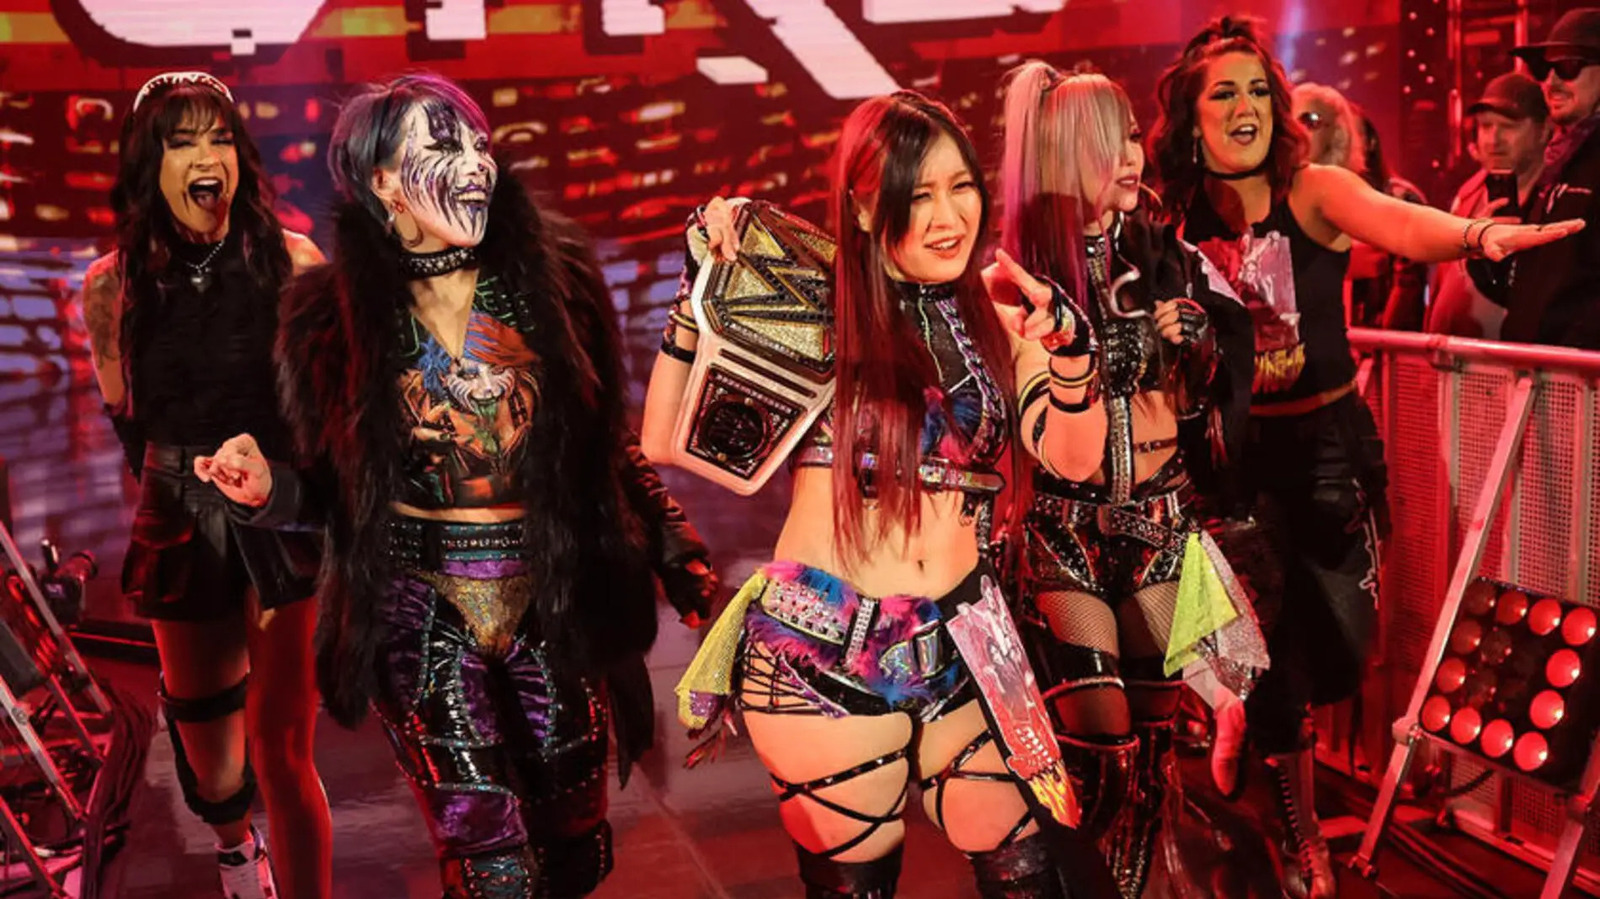 Damage CTRL Challenge WWE Women's Tag Champs Following Successful Defense On SmackDown